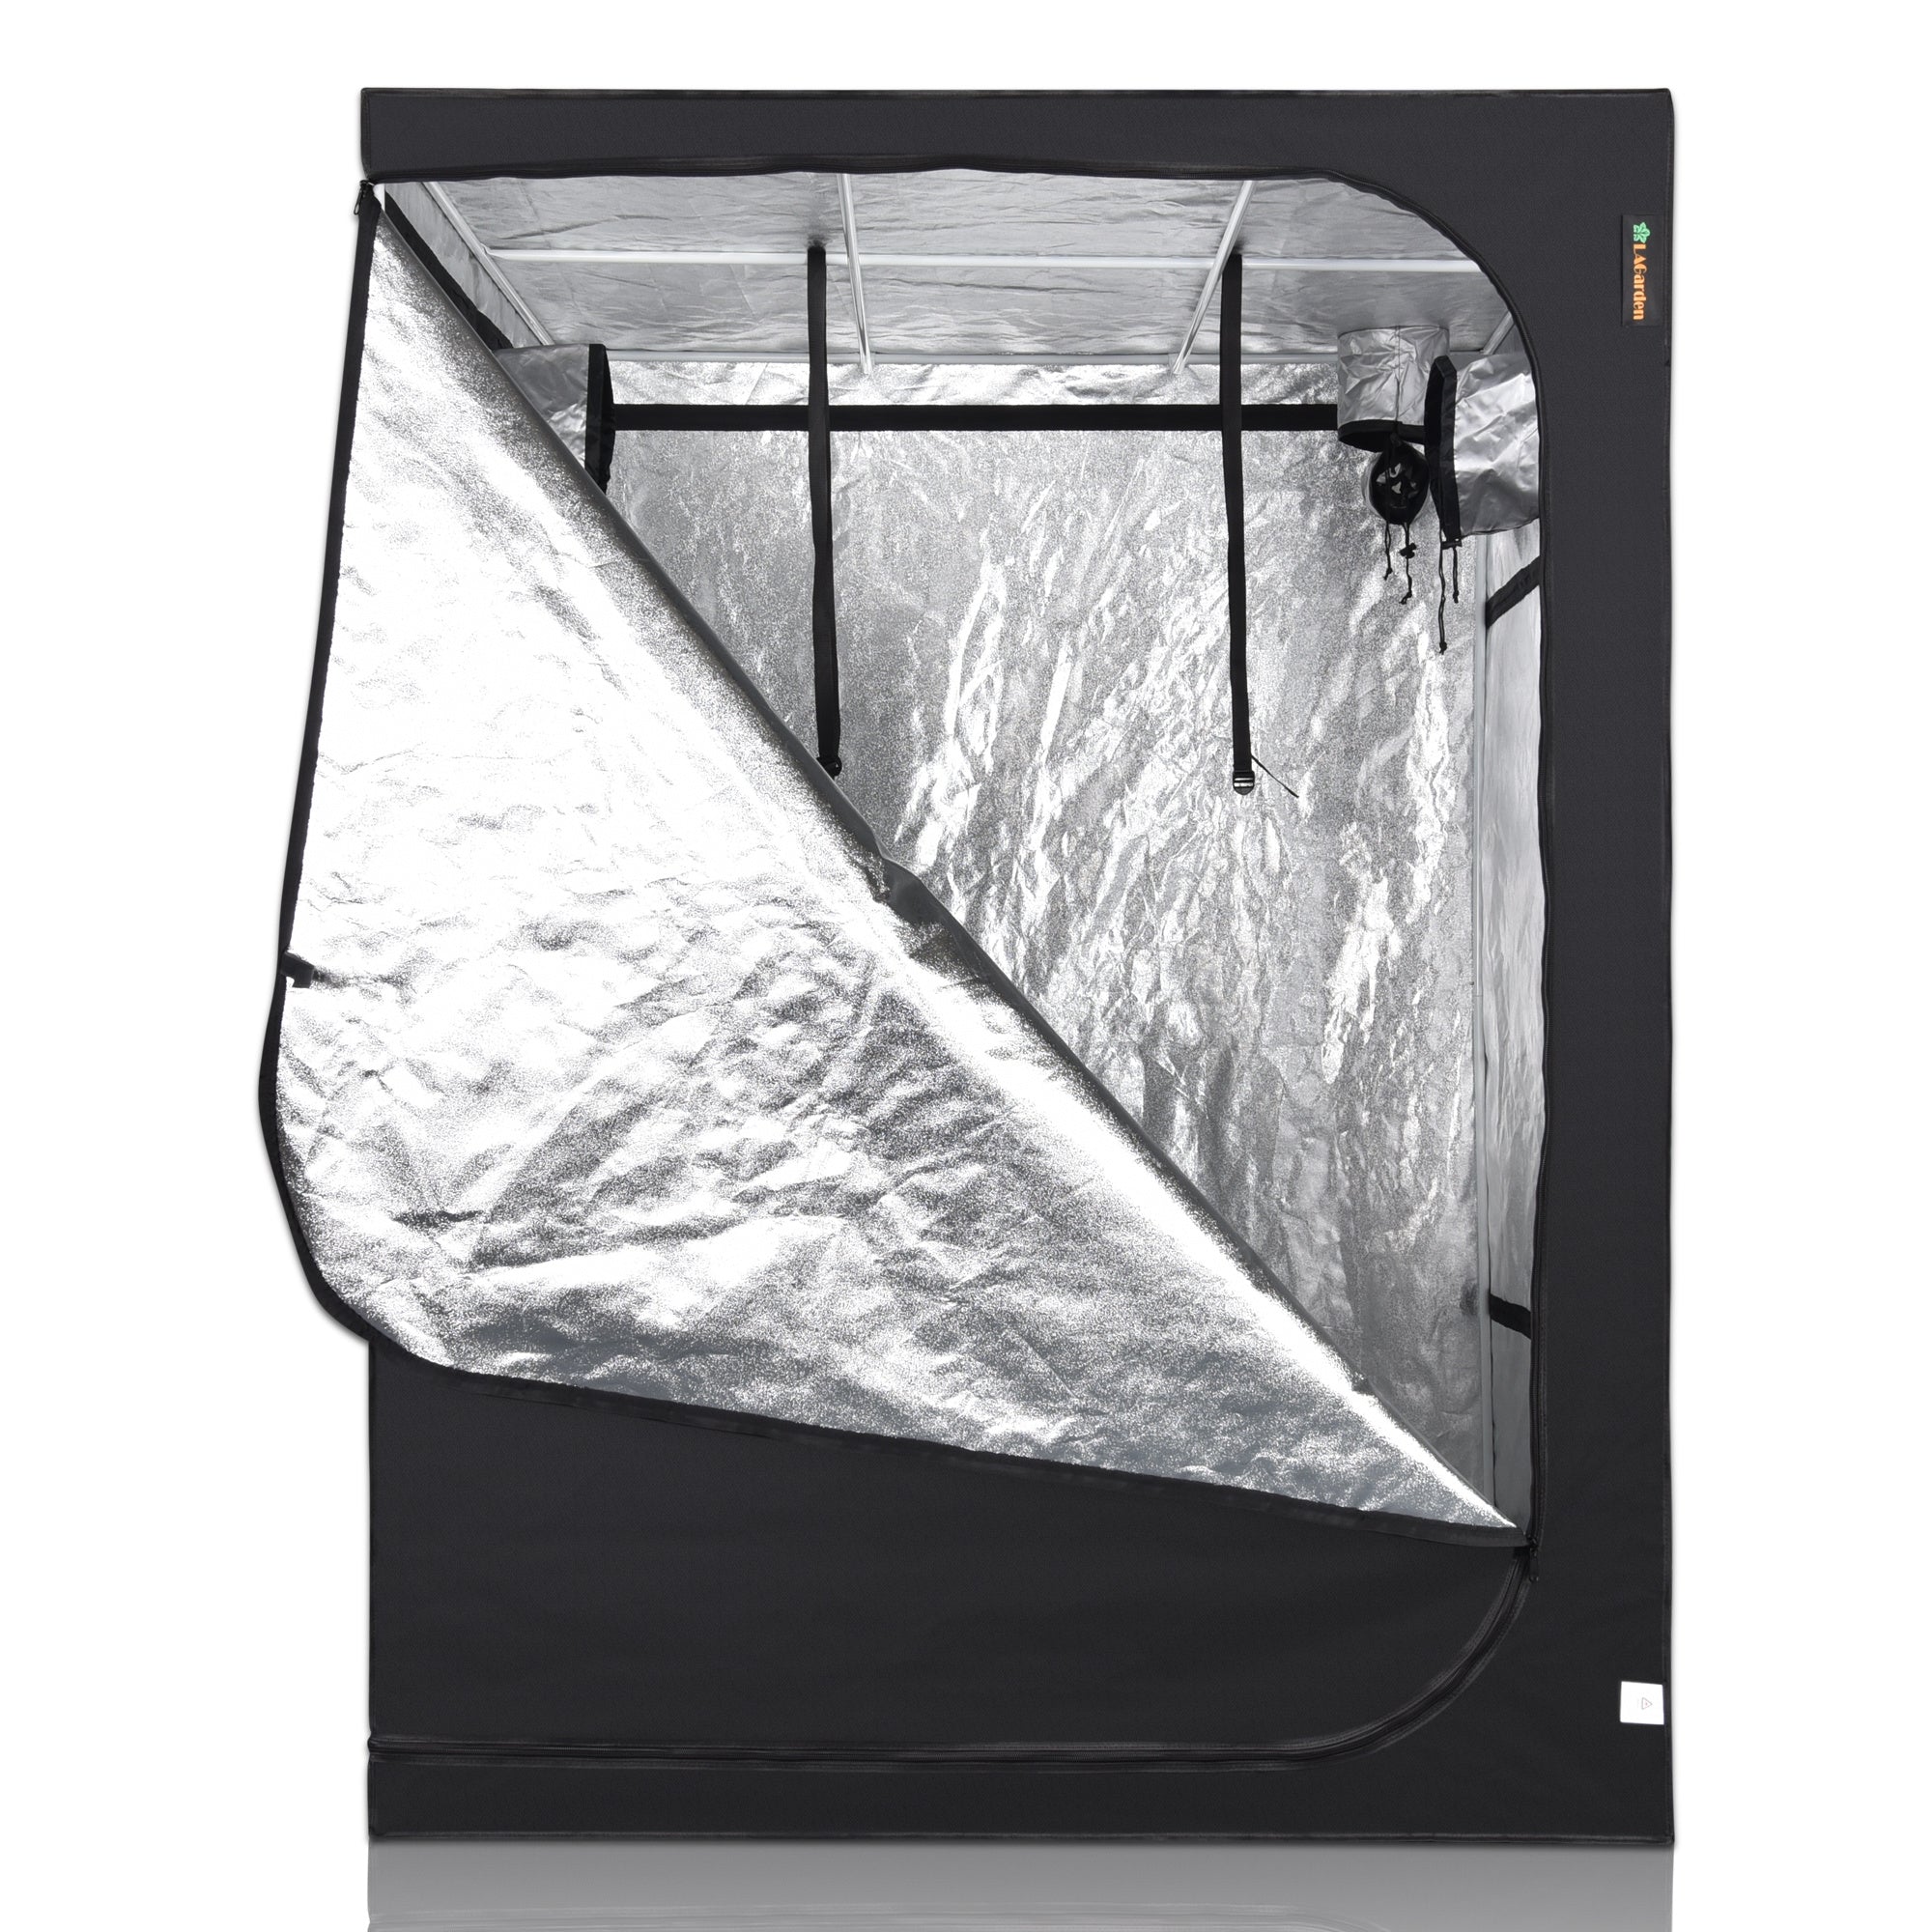 60x60x78in Lightproof & Durable Hydroponics Grow Tent with Reflective Interior, Easy Observation & Ventilation, Sturdy Frame for Indoor Plant Growing